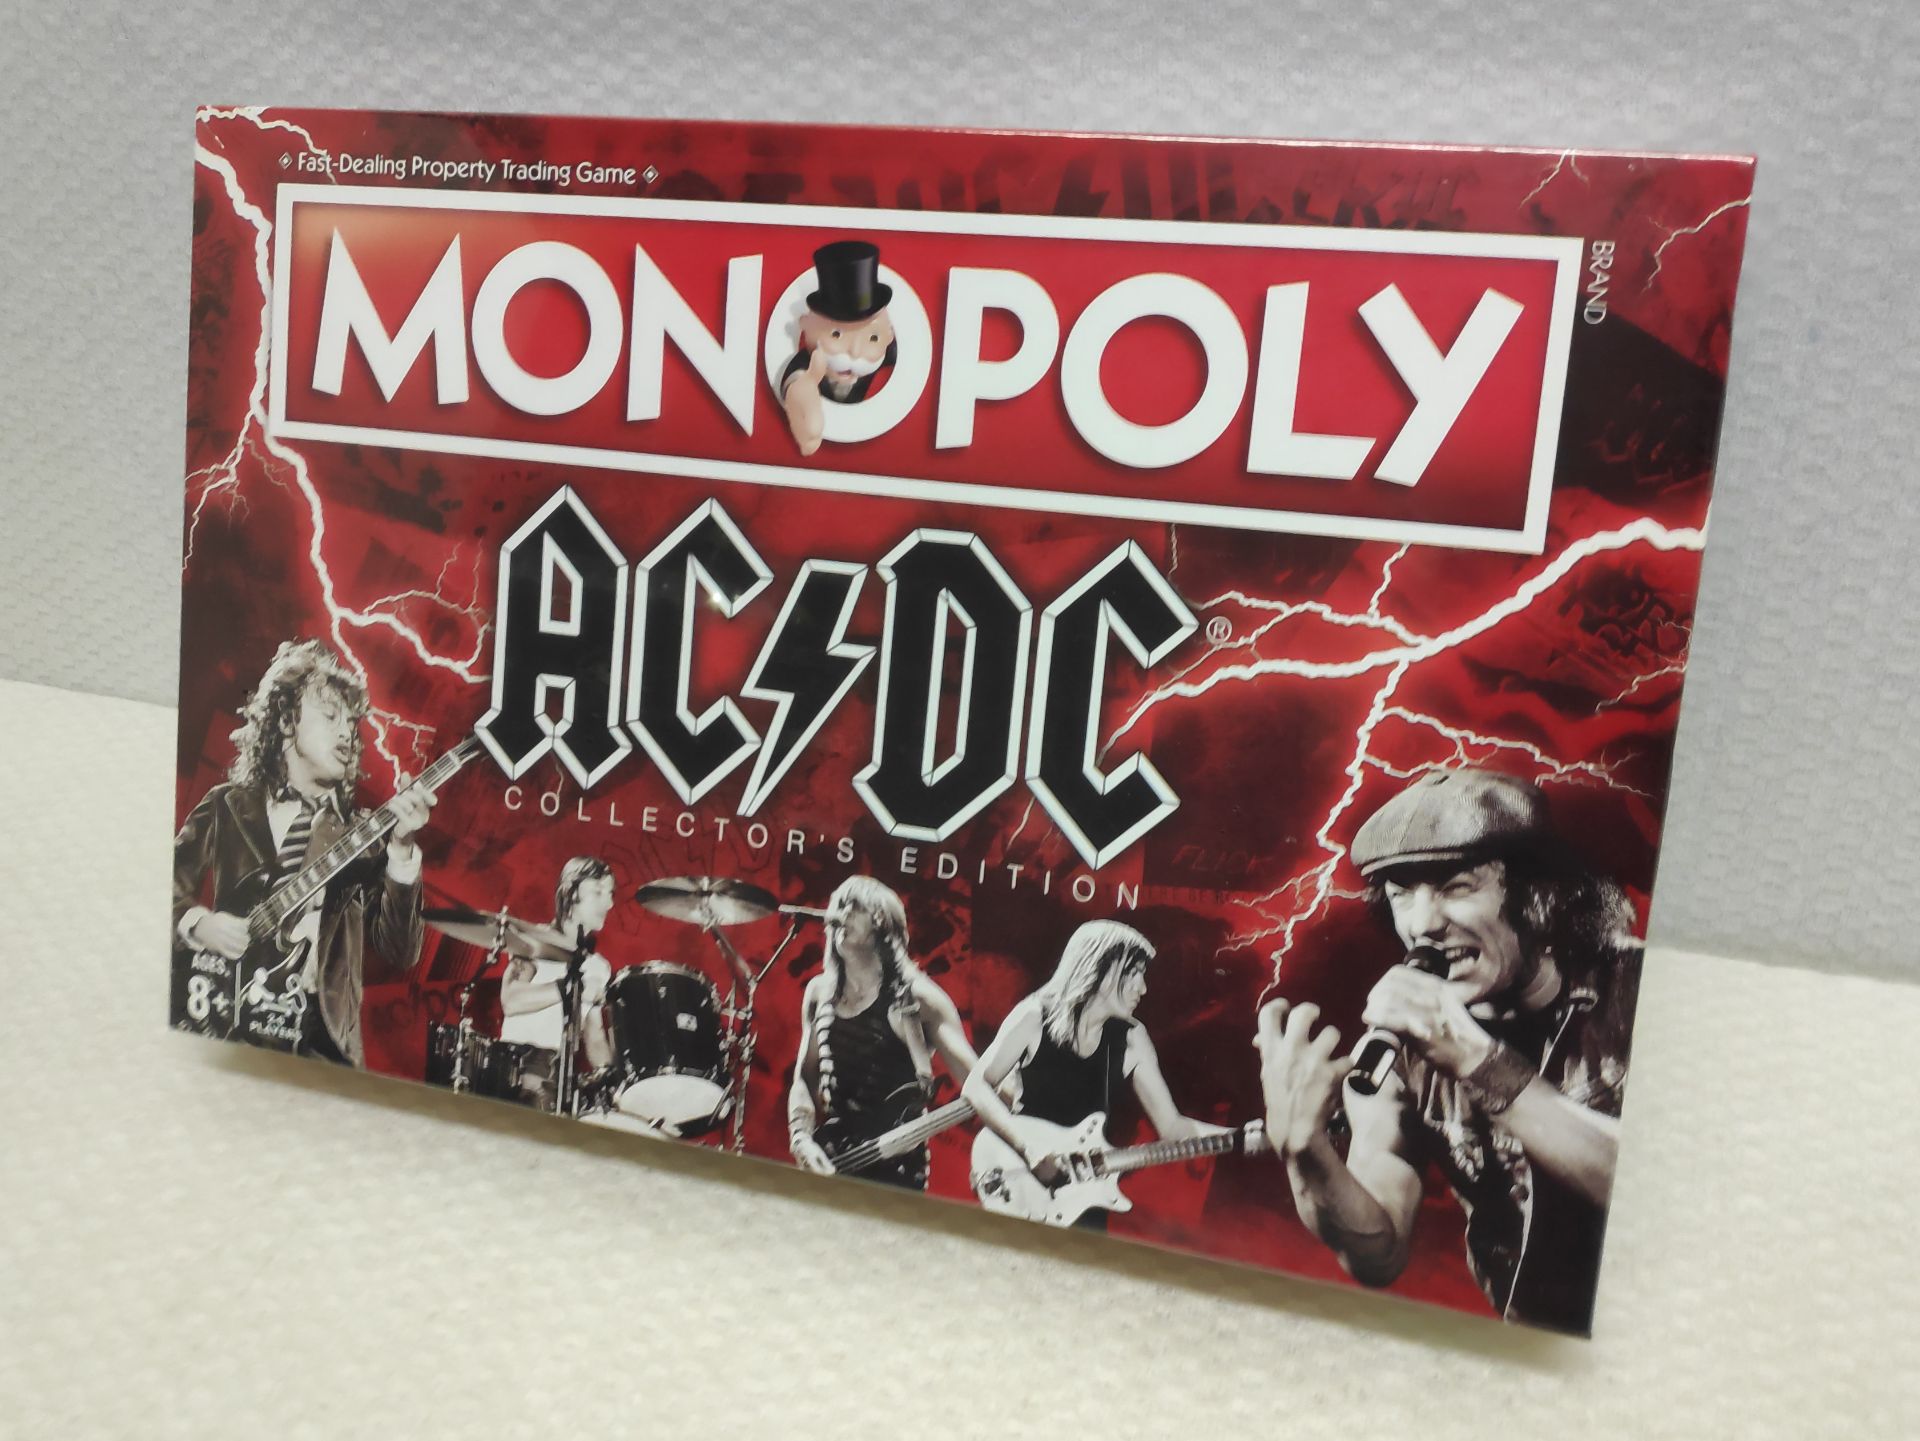 1 x AC/DC Collector's Edition Monopoly - New/Sealed - Image 7 of 8